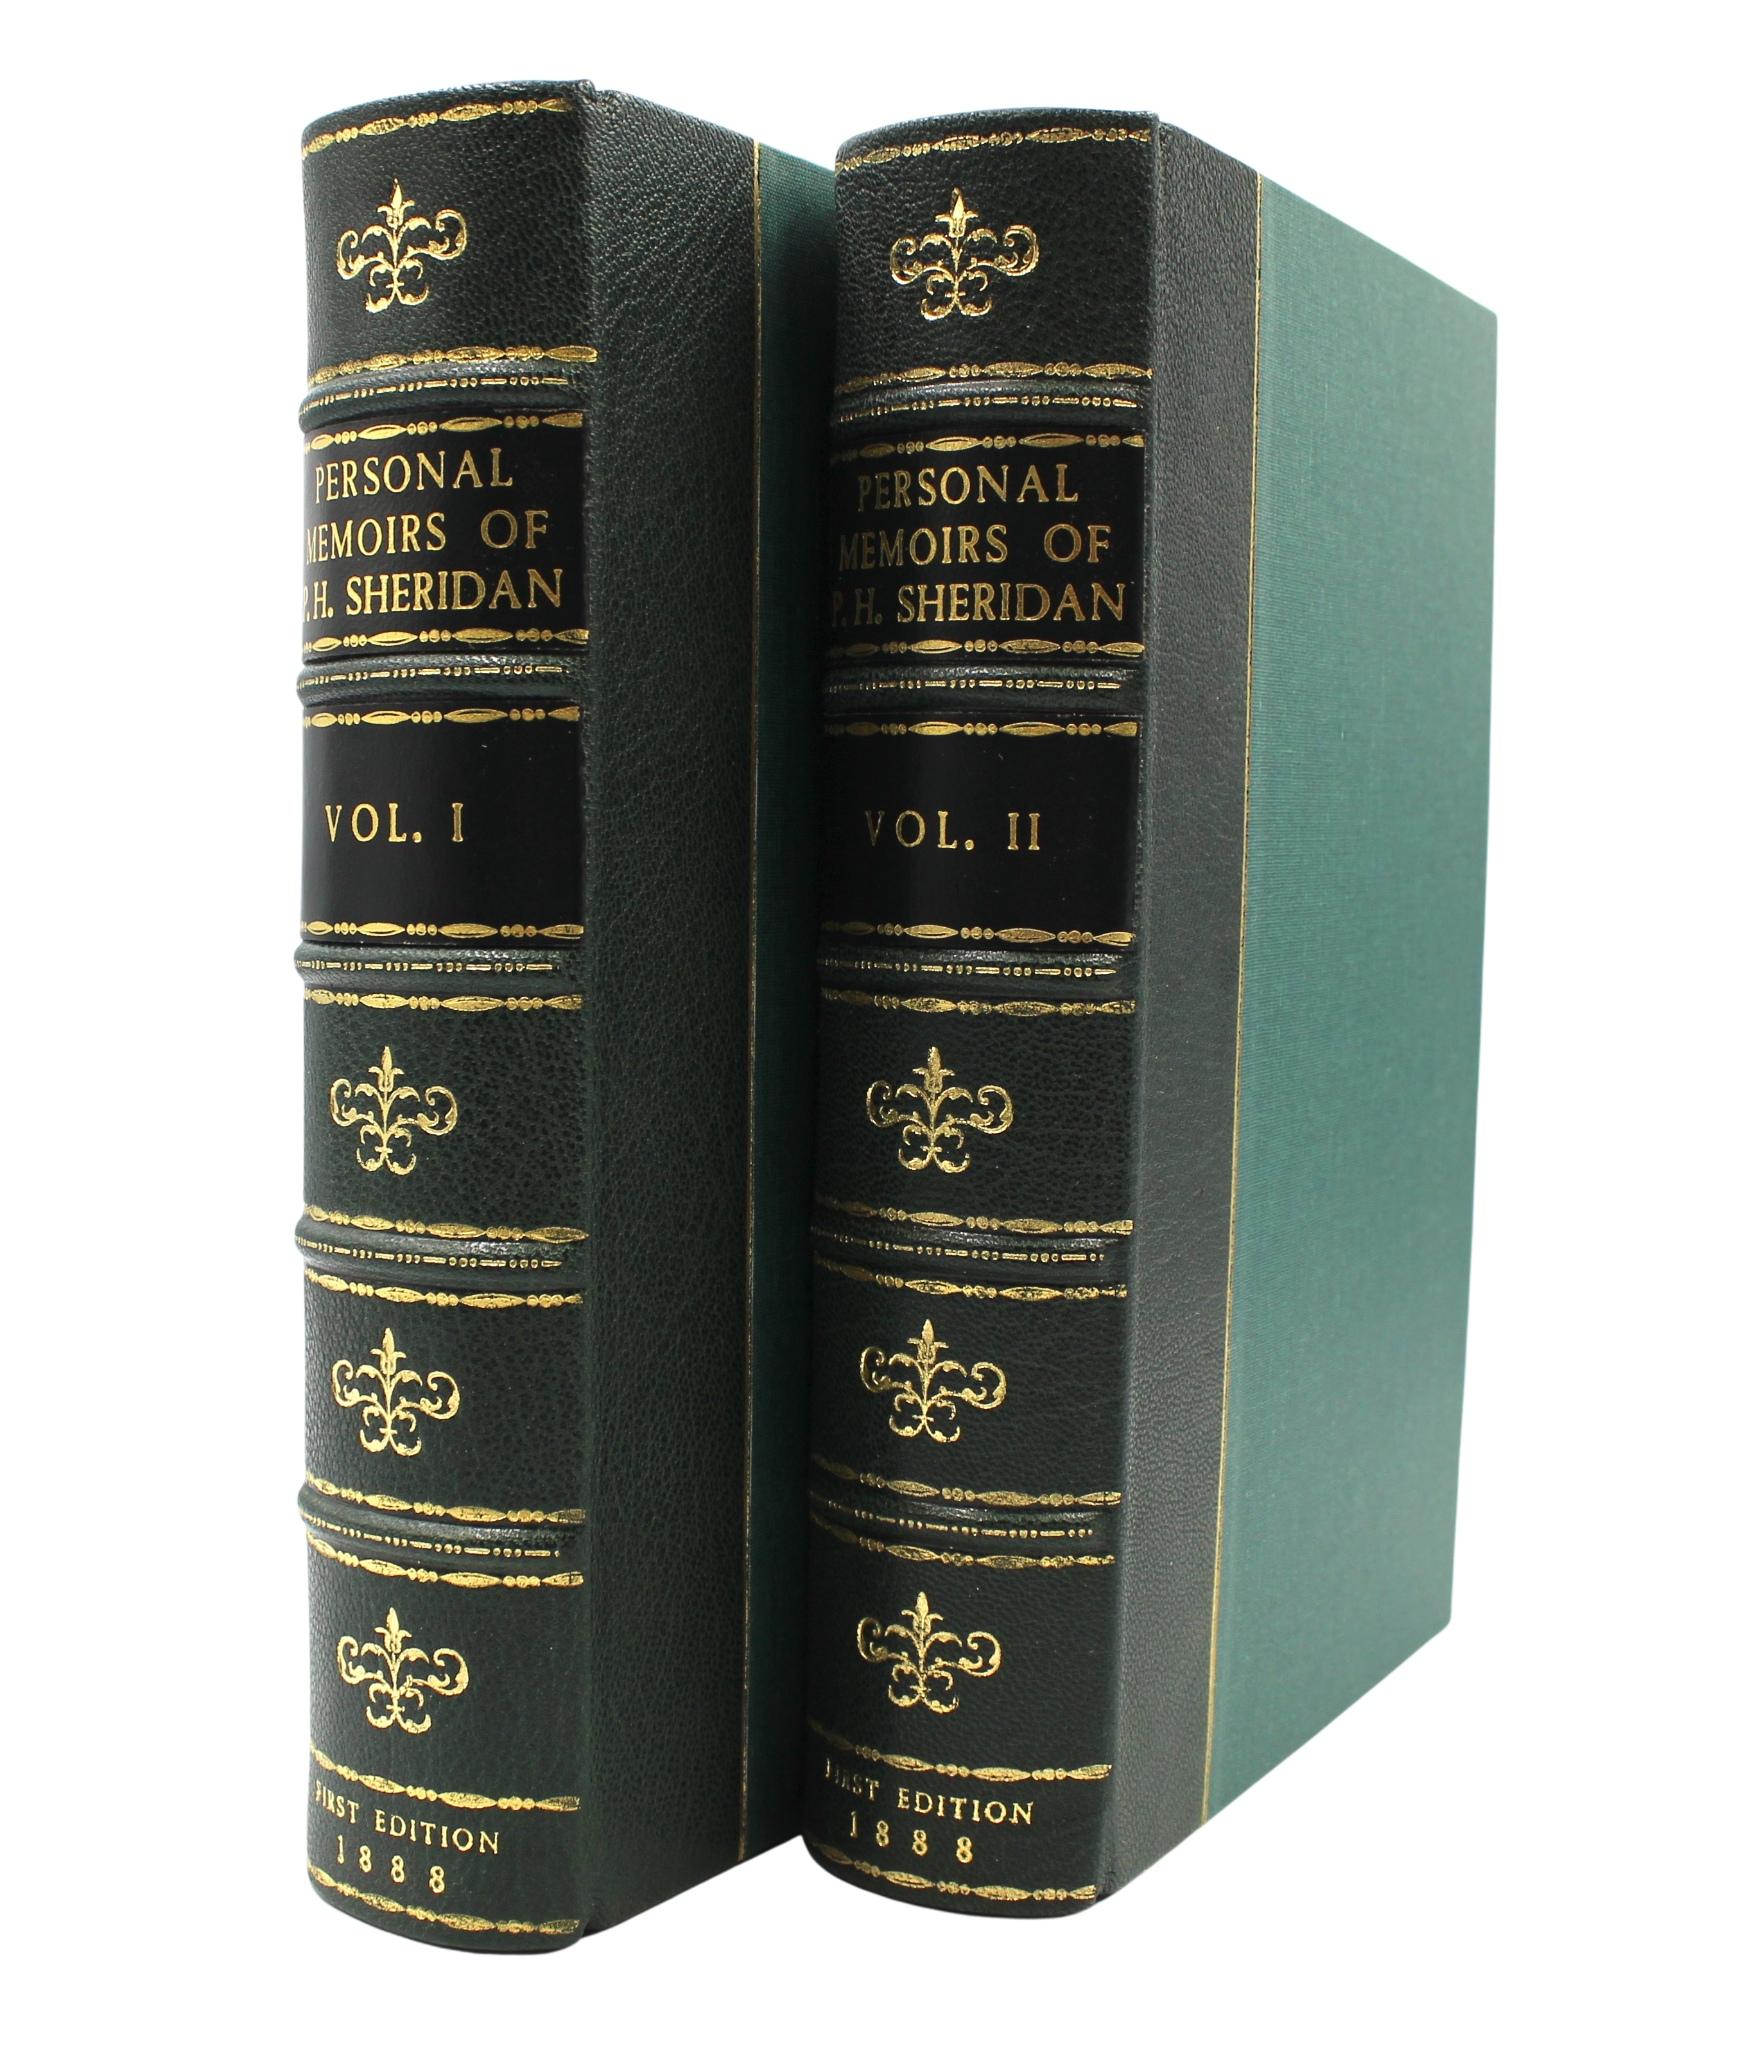 American Personal Memoirs of P. H. Sheridan, First Edition, Two-Volume Set, 1888 For Sale